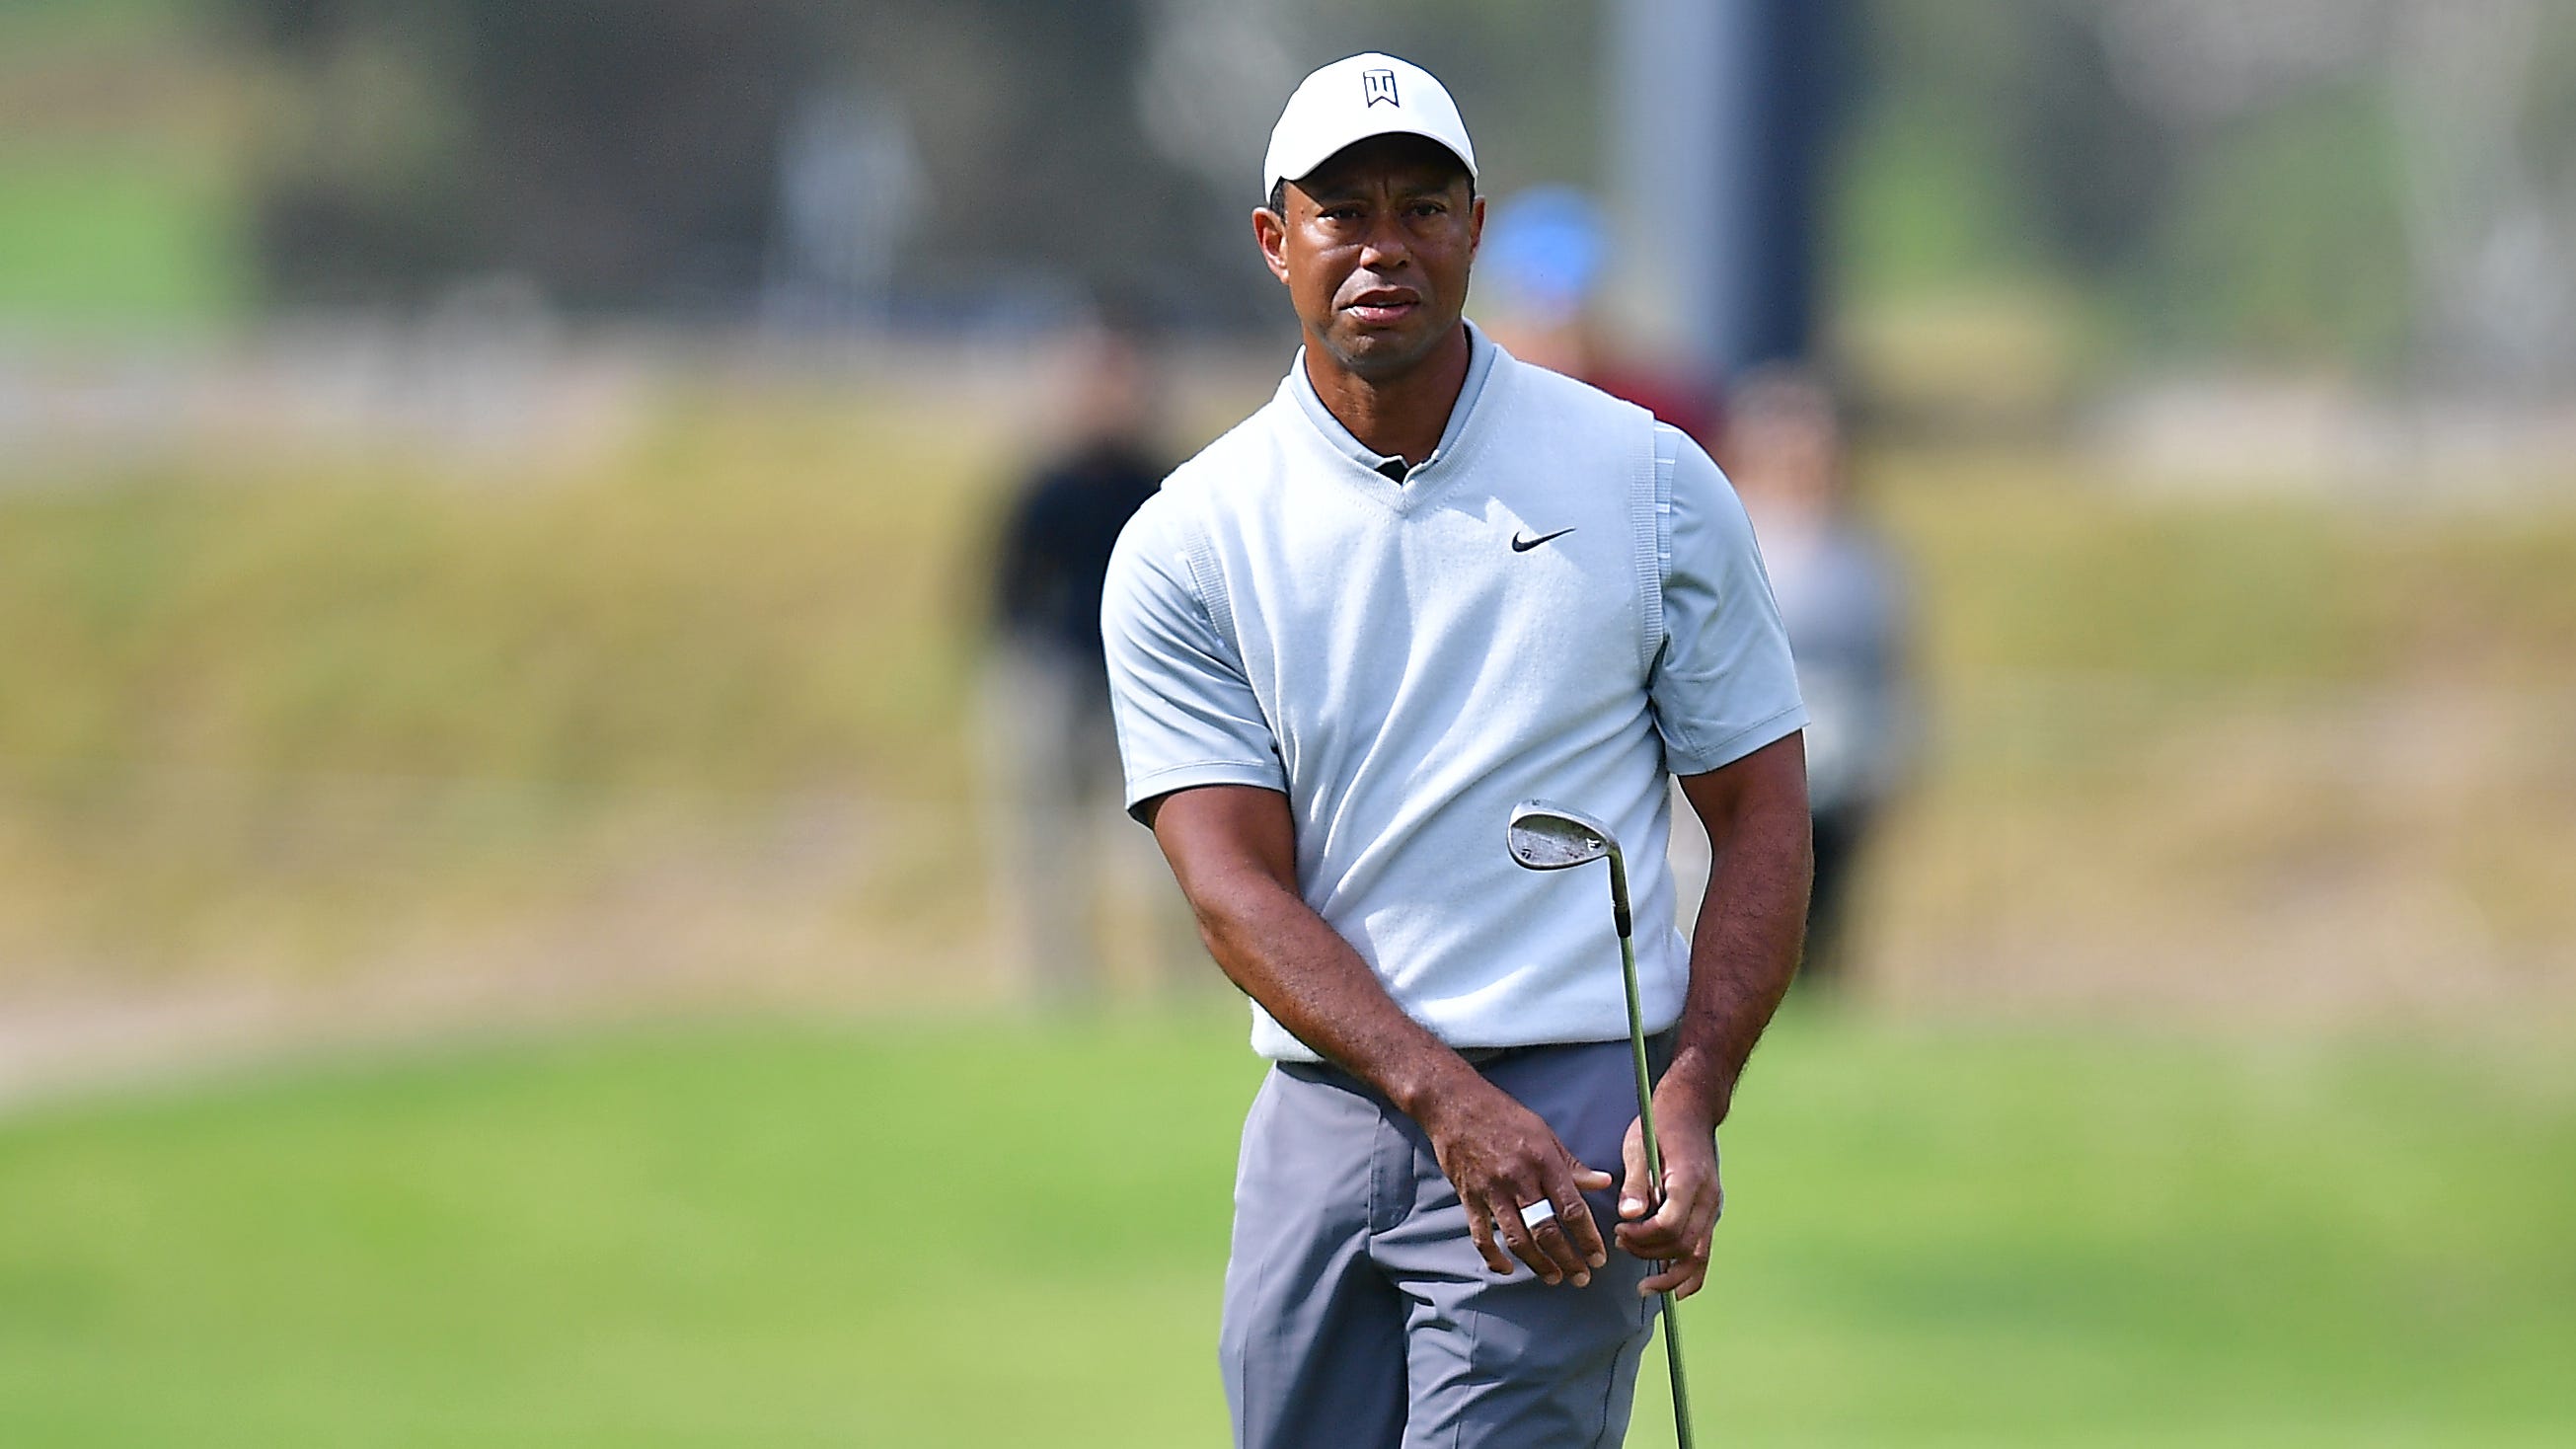 Tiger Woods Where will golf star play next before Masters?